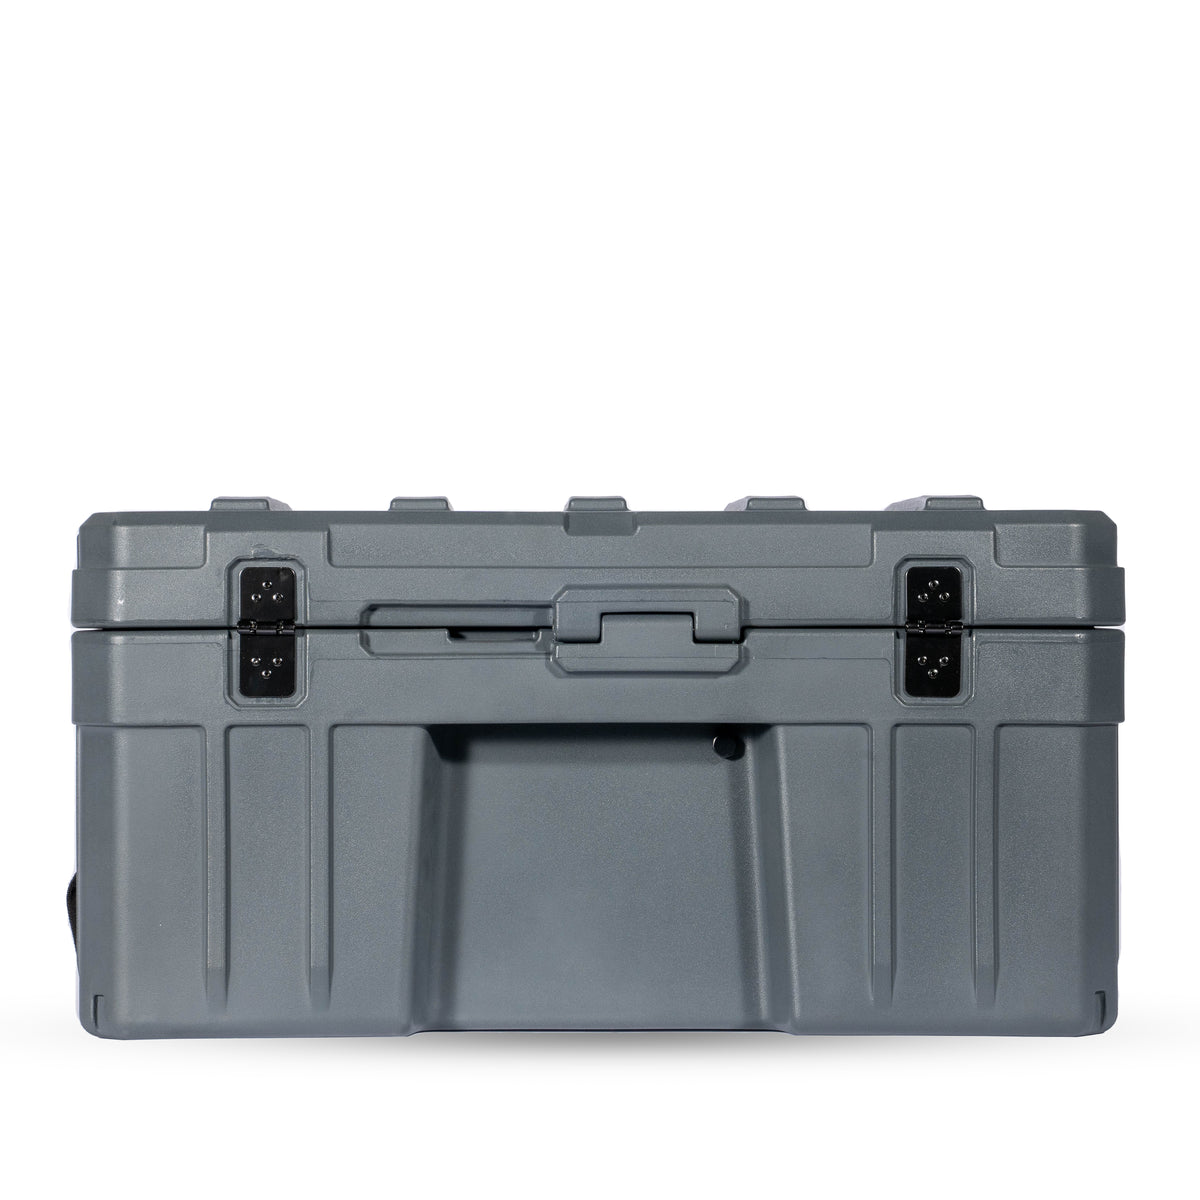 76L RUGGED CASE - BaseCamp Provisions